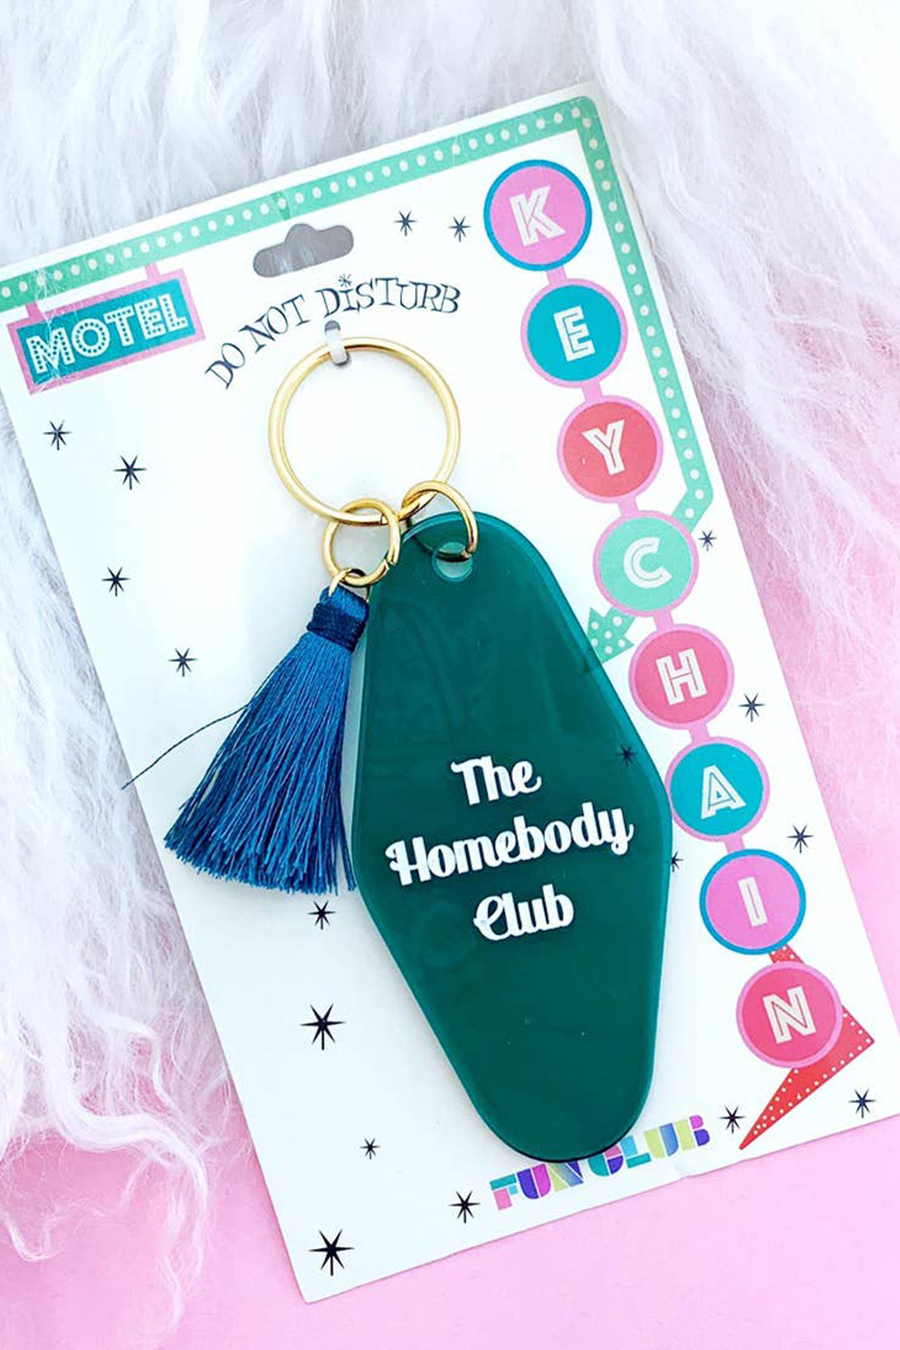 The Homebody Club Keychain - Main Image Number 1 of 1